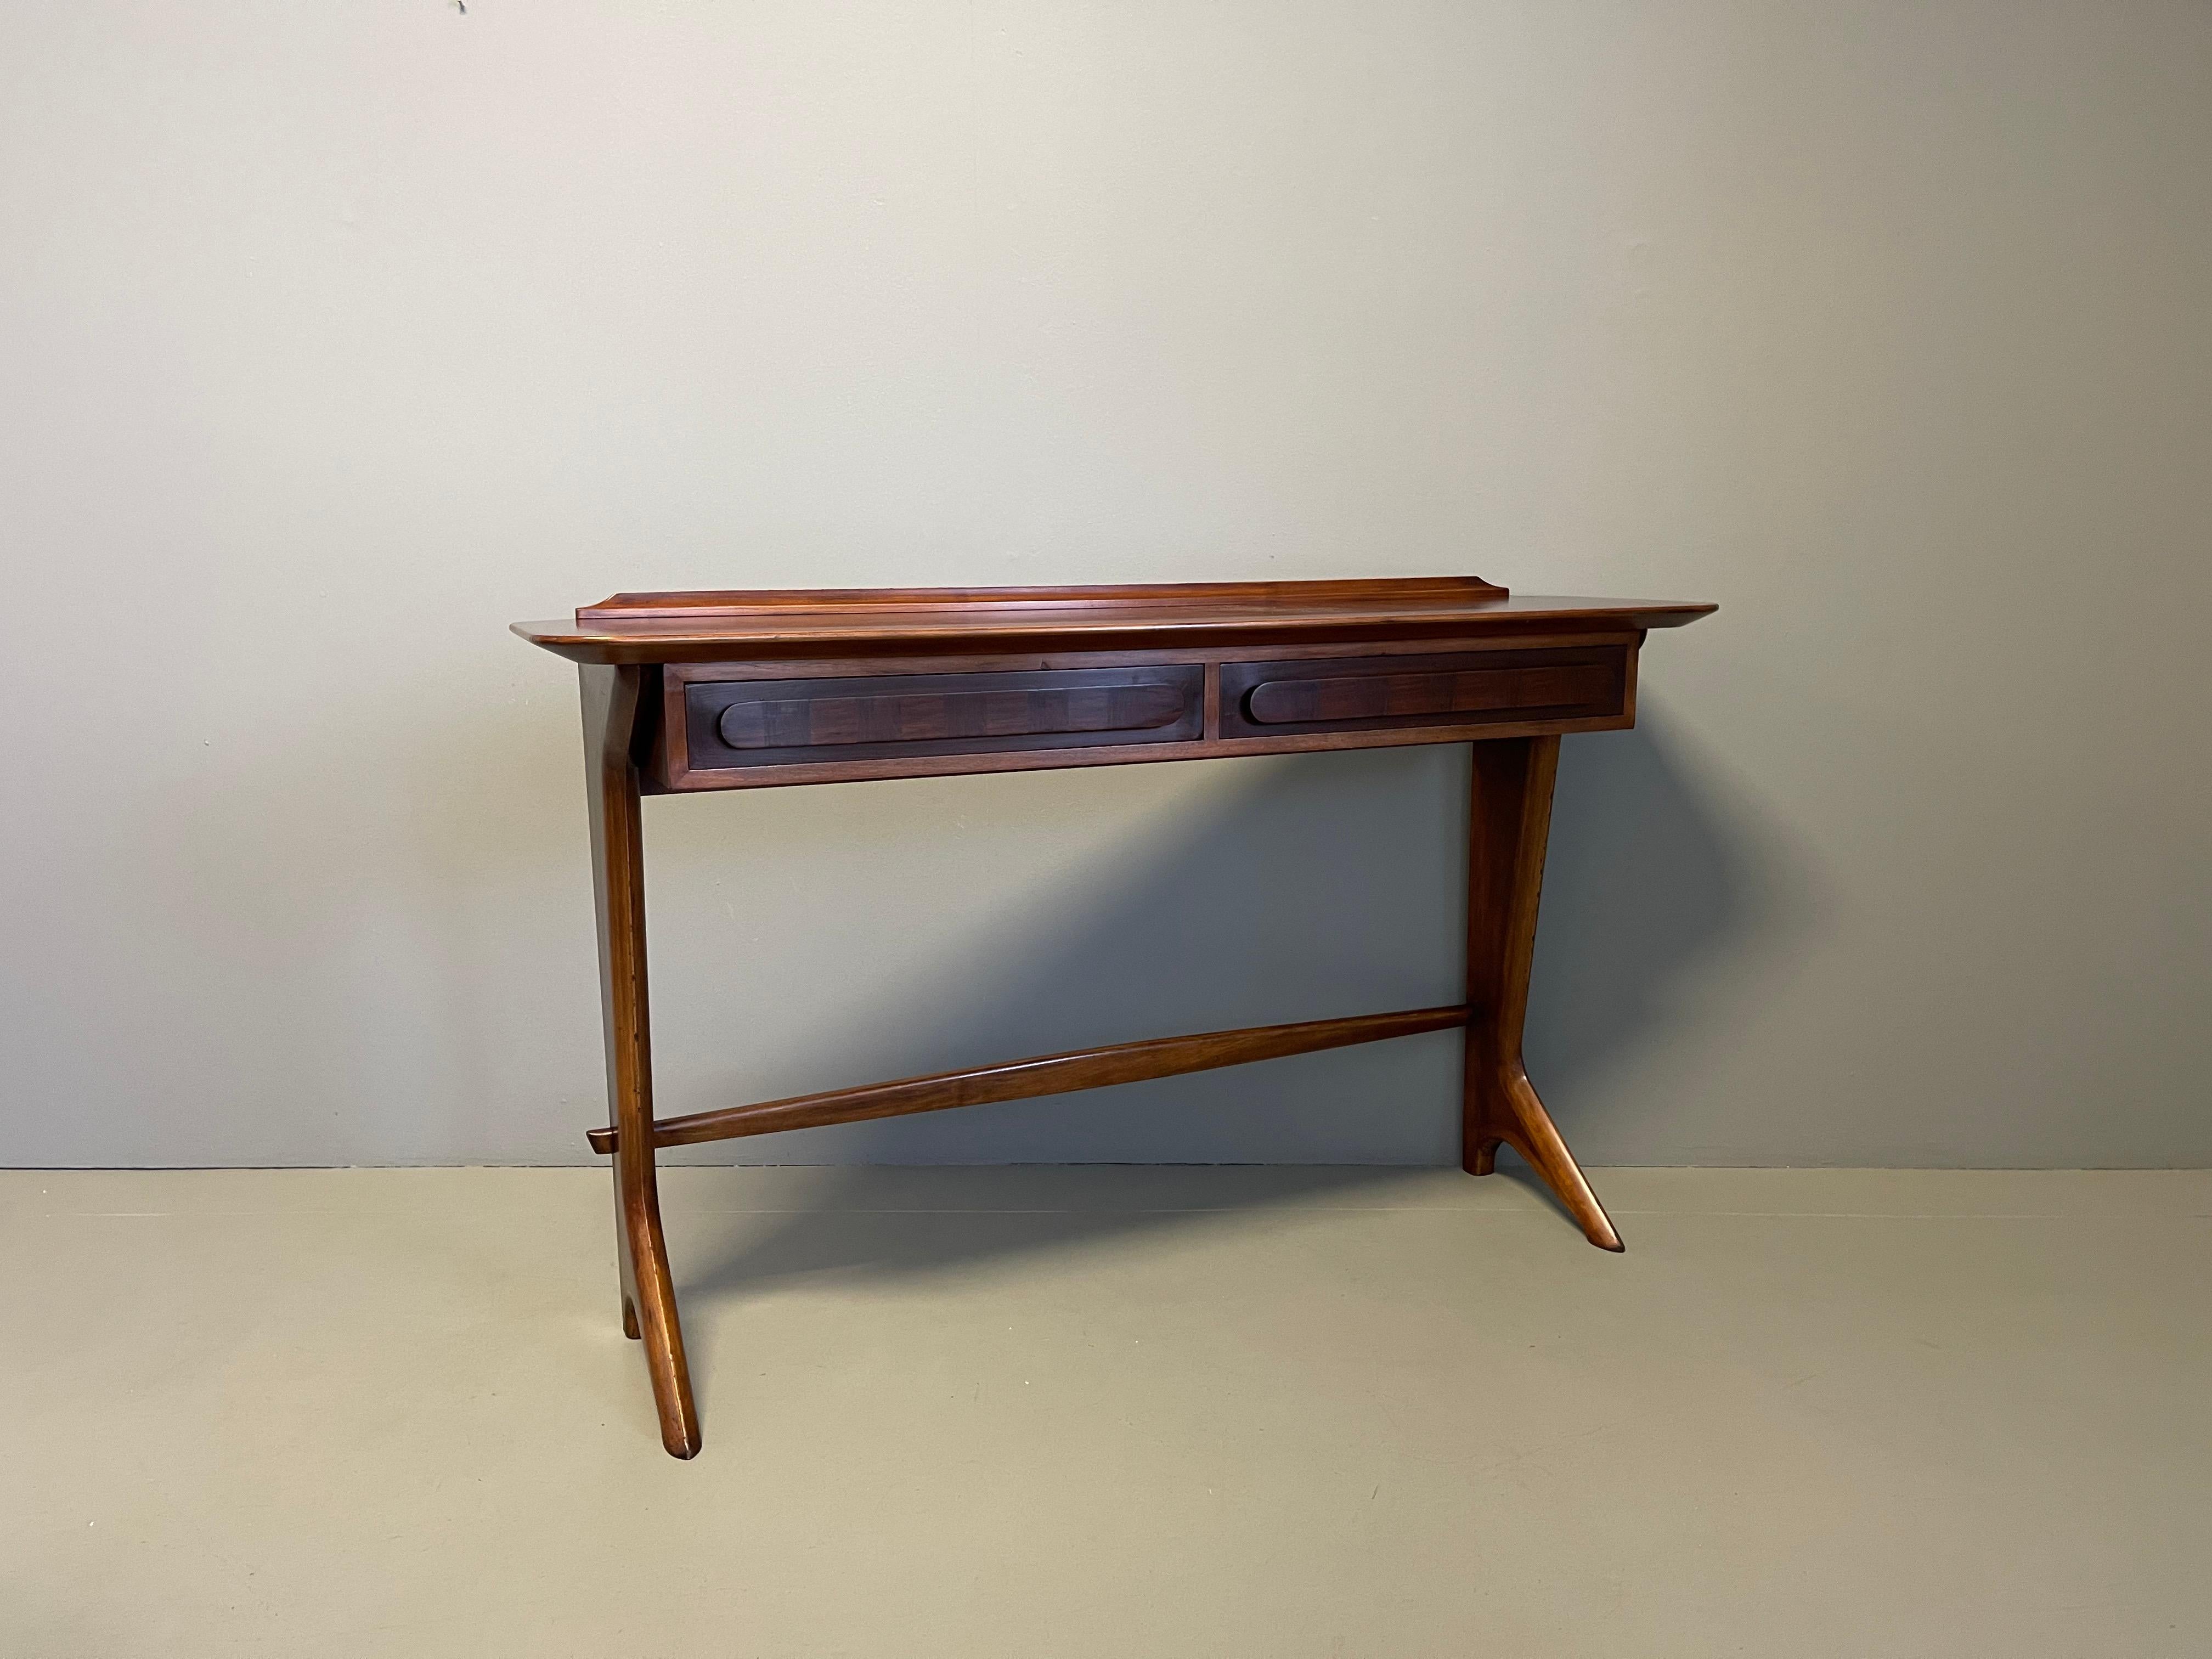 Rare and important Italian Mid-Century Modern console or sofa table in Italian walnut by Ico Parisi. Sculptural form with 2 drawers and herringbone inlay to top and throughout. 2 pieces are known to have been made. A daring piece of architecture and